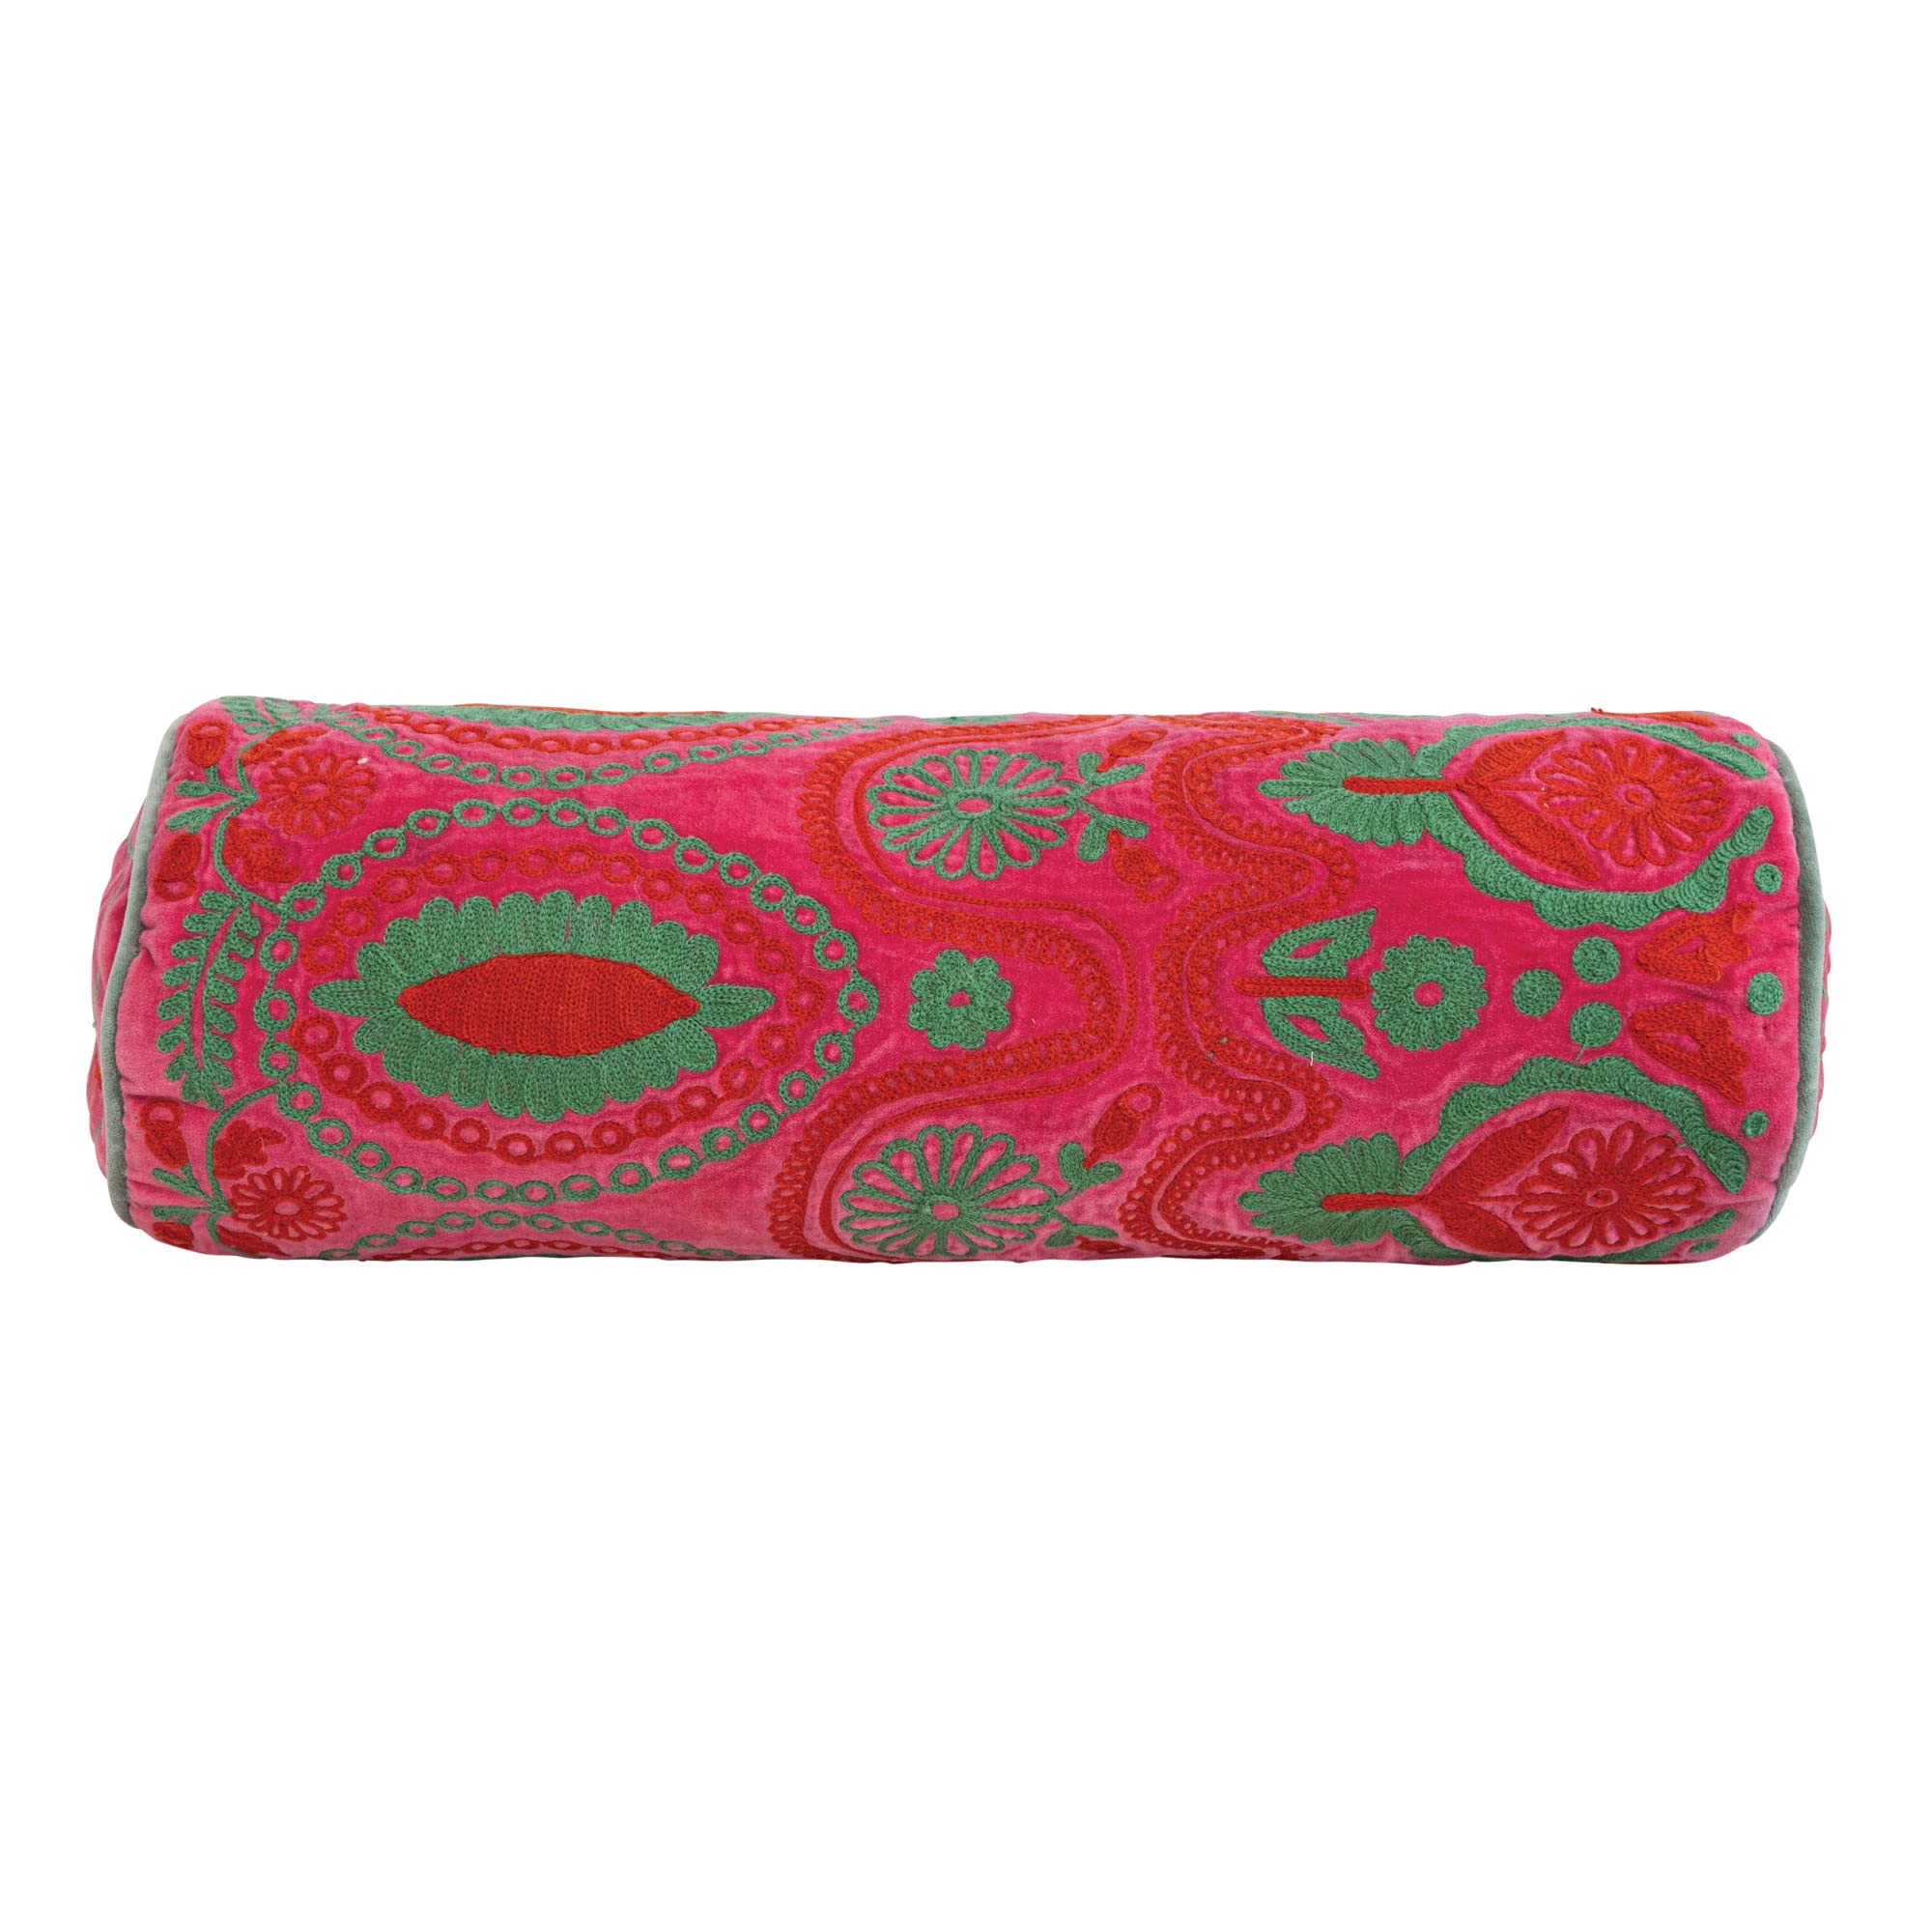 Creative Co-Op Cotton Velvet Bolster Pillow with Floral Embroidery Multicolor Decorative Pillow Red